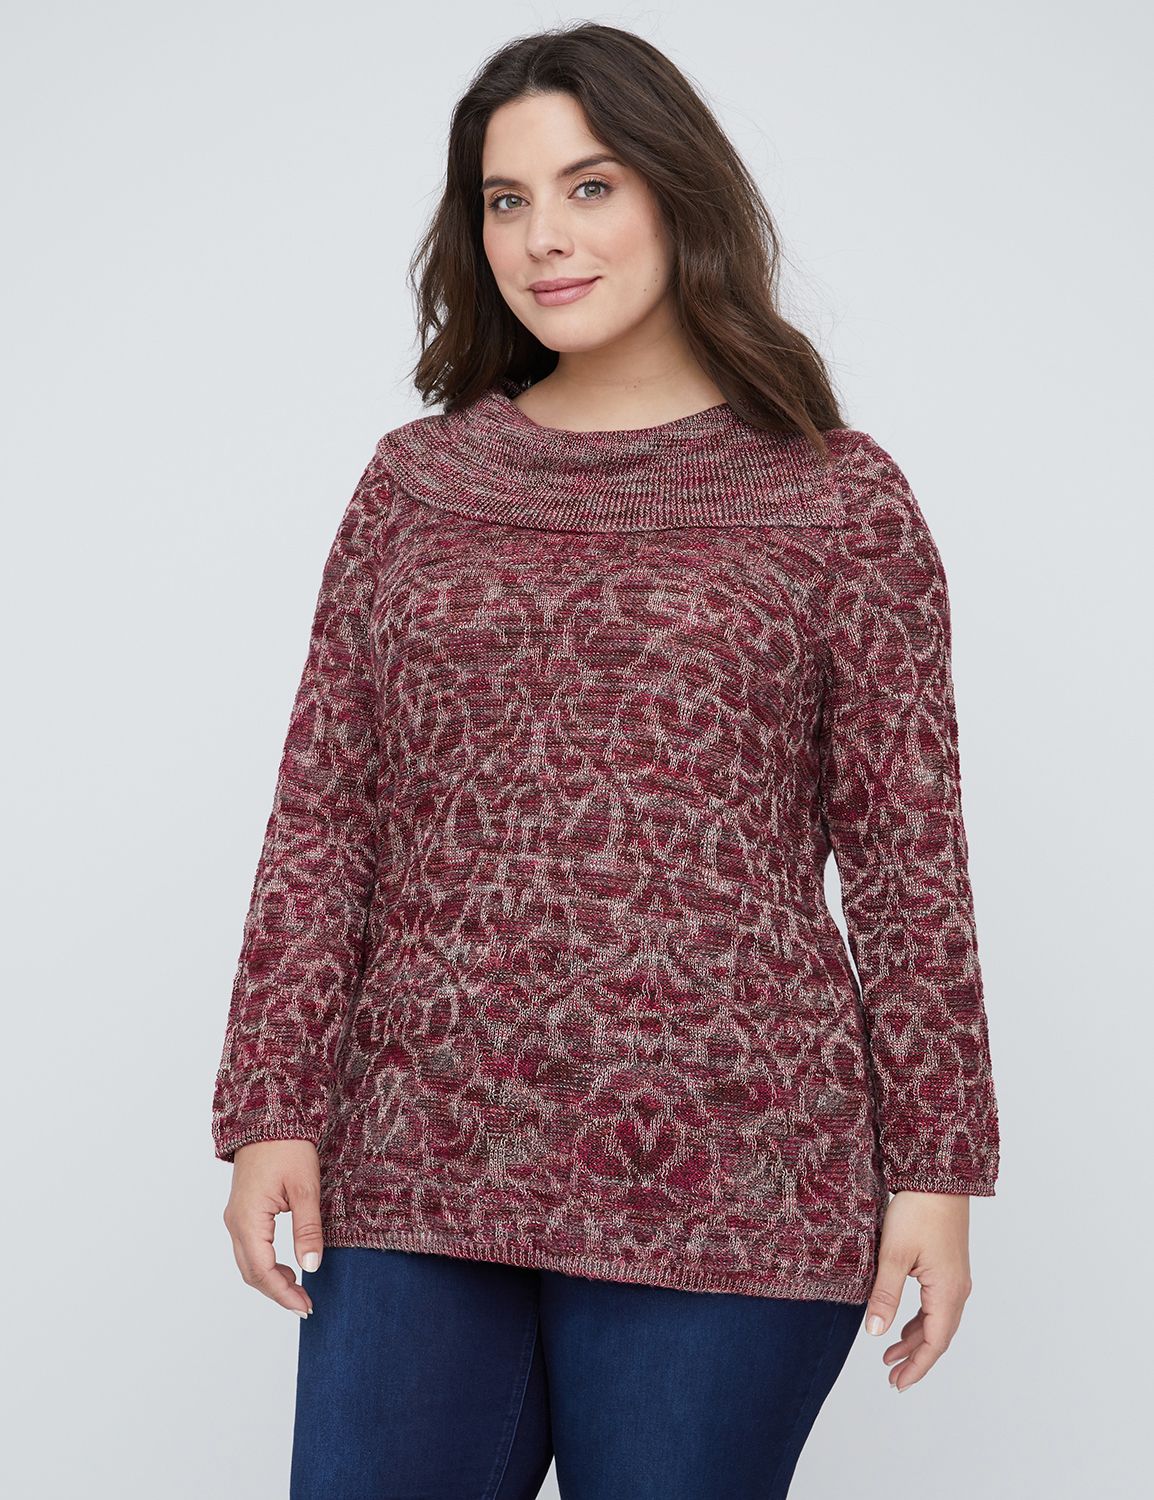 Women's Plus Size Sweaters & Holiday Sweaters | Catherines